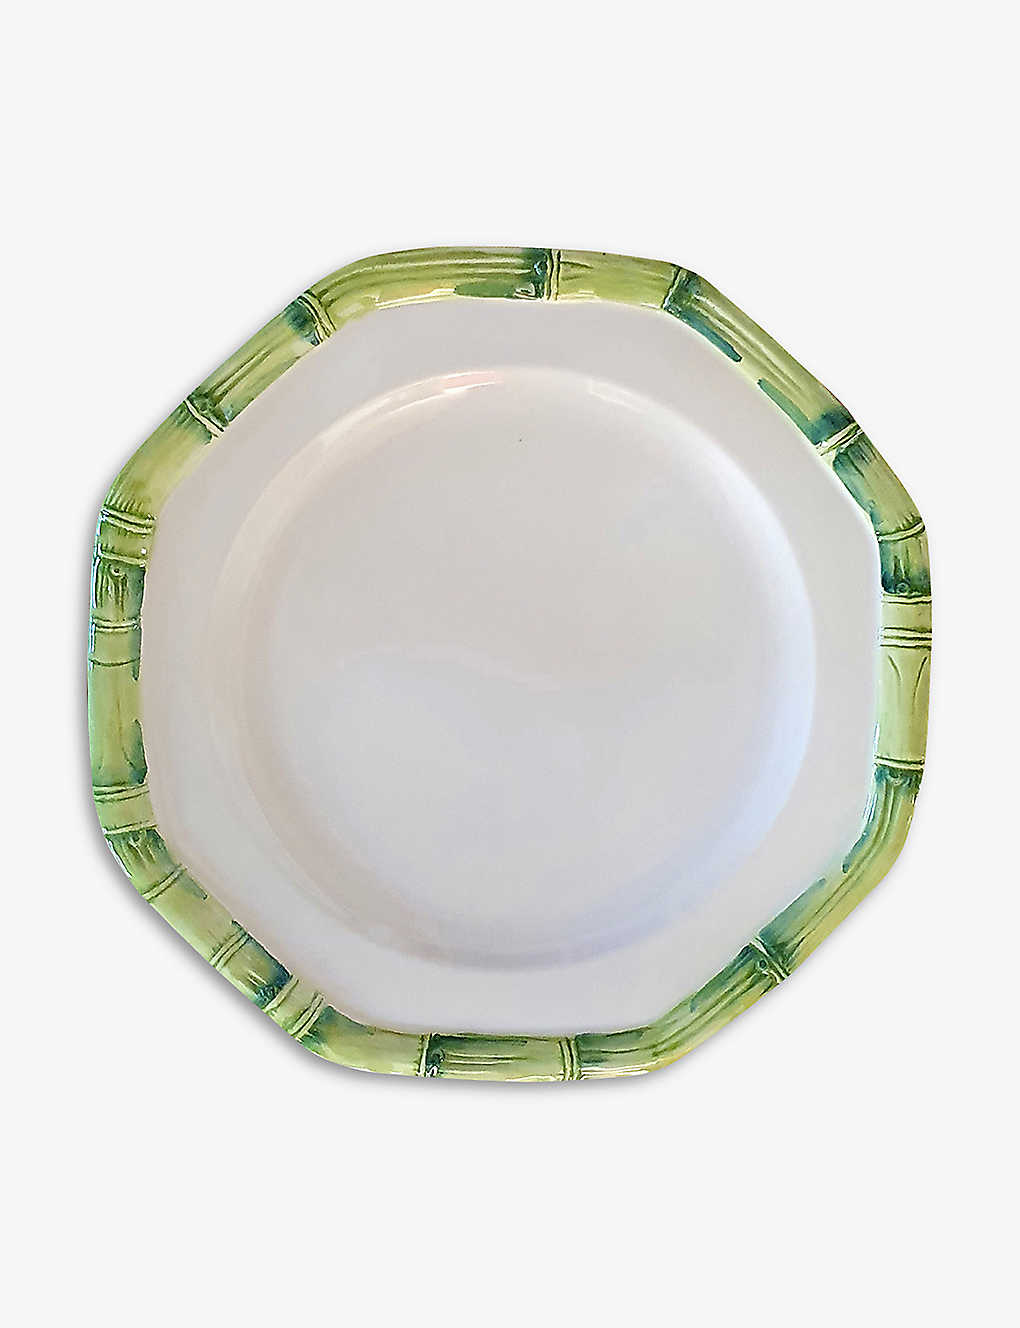 Les Ottomans Green Bamboo Hand-painted Ceramic Dinner Plate 27cm